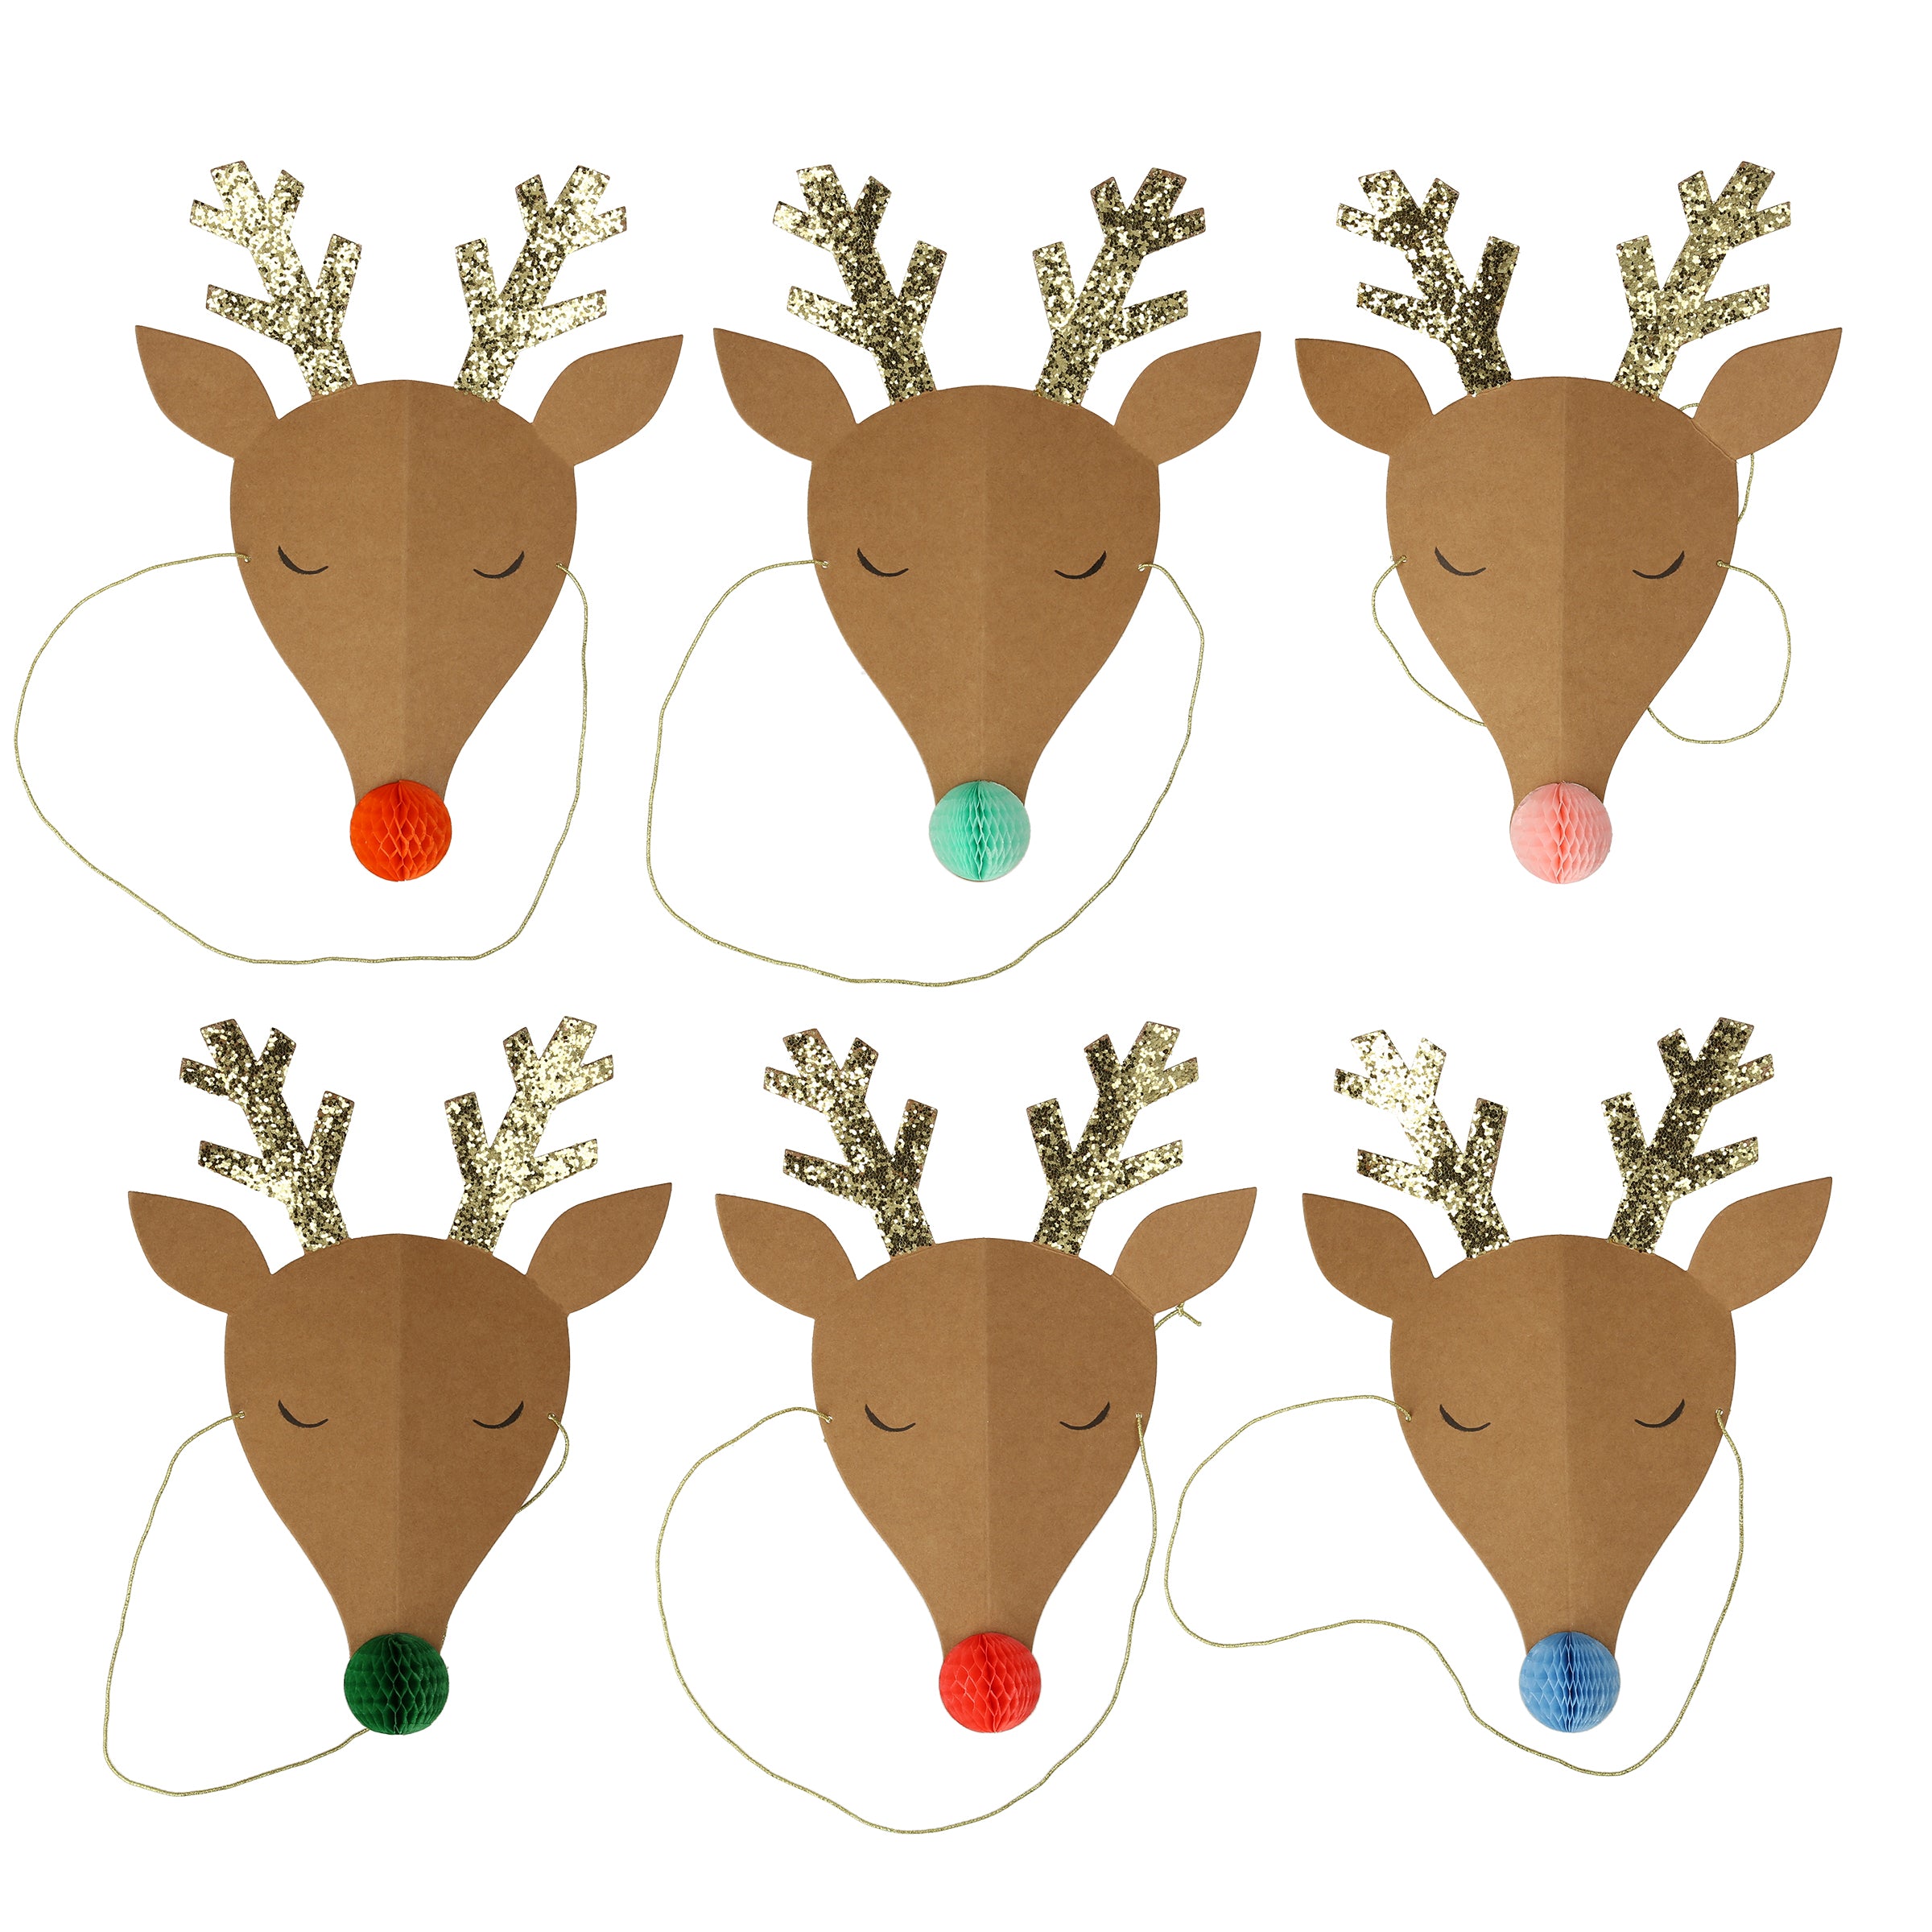 Our reindeer hats make excellent party hats for kids, and fun party hats for adults.